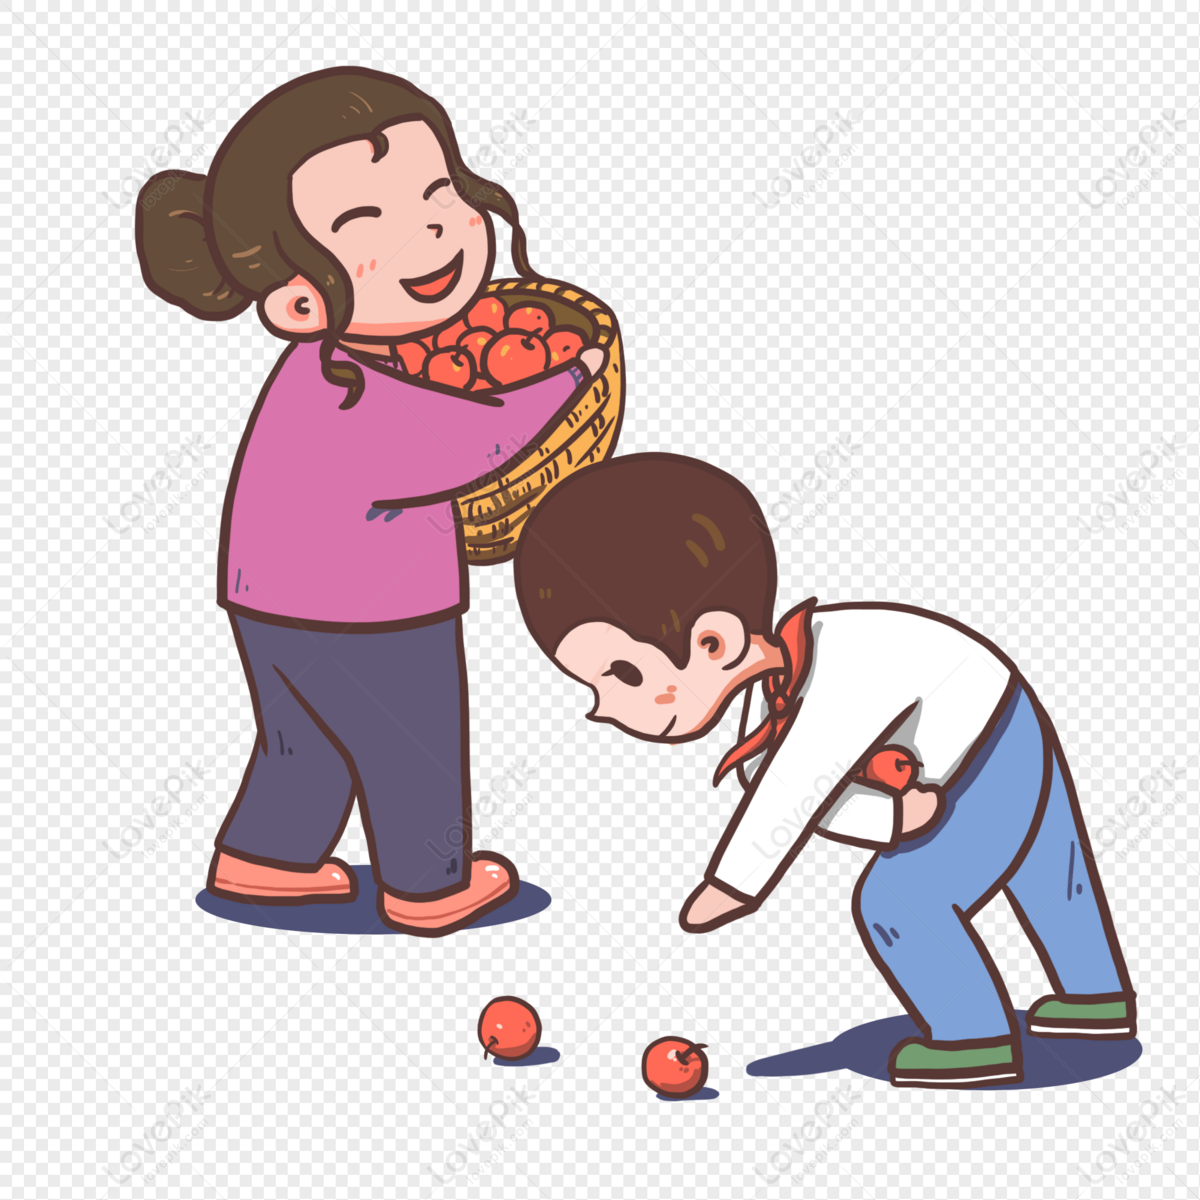 helping people in need clipart